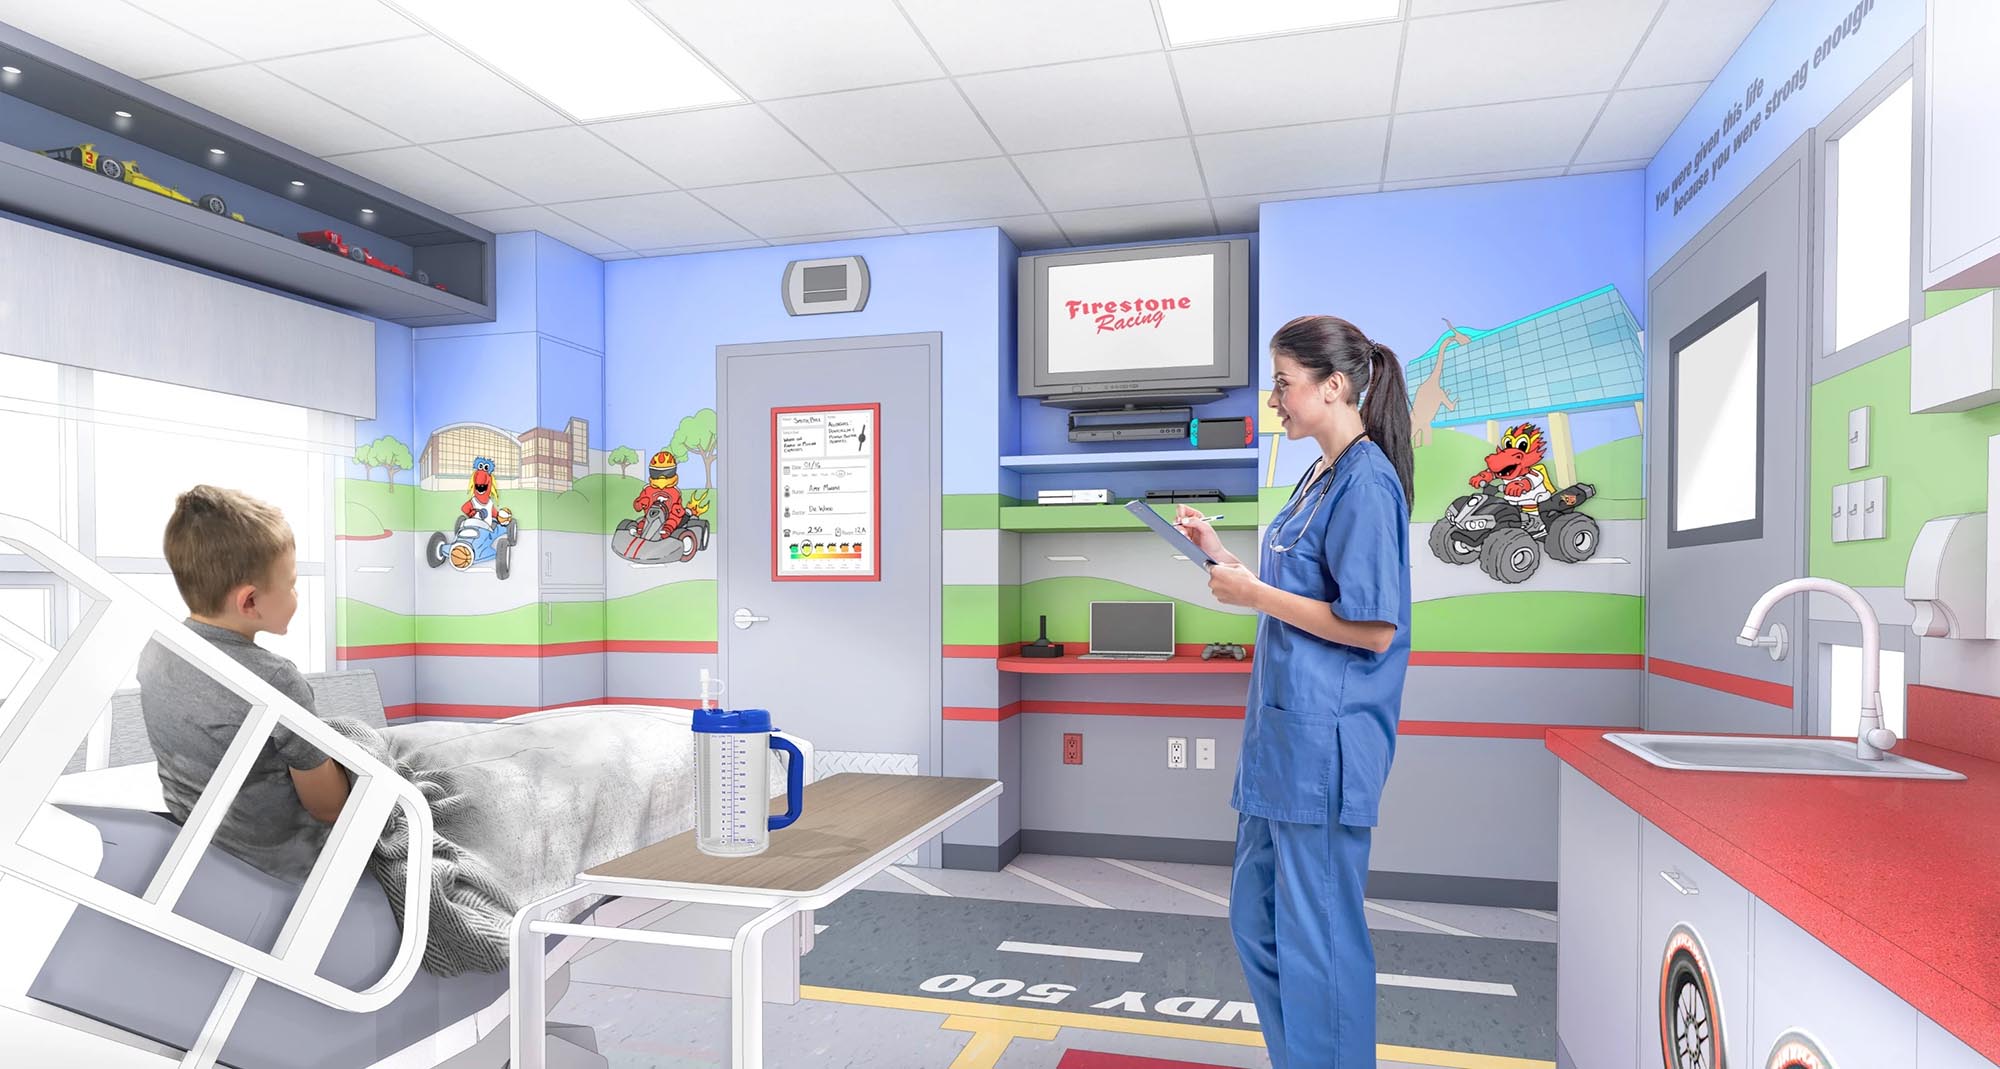 Peyton Manning Children's Hospital Indy 500 Room rendering concept with child and nurse